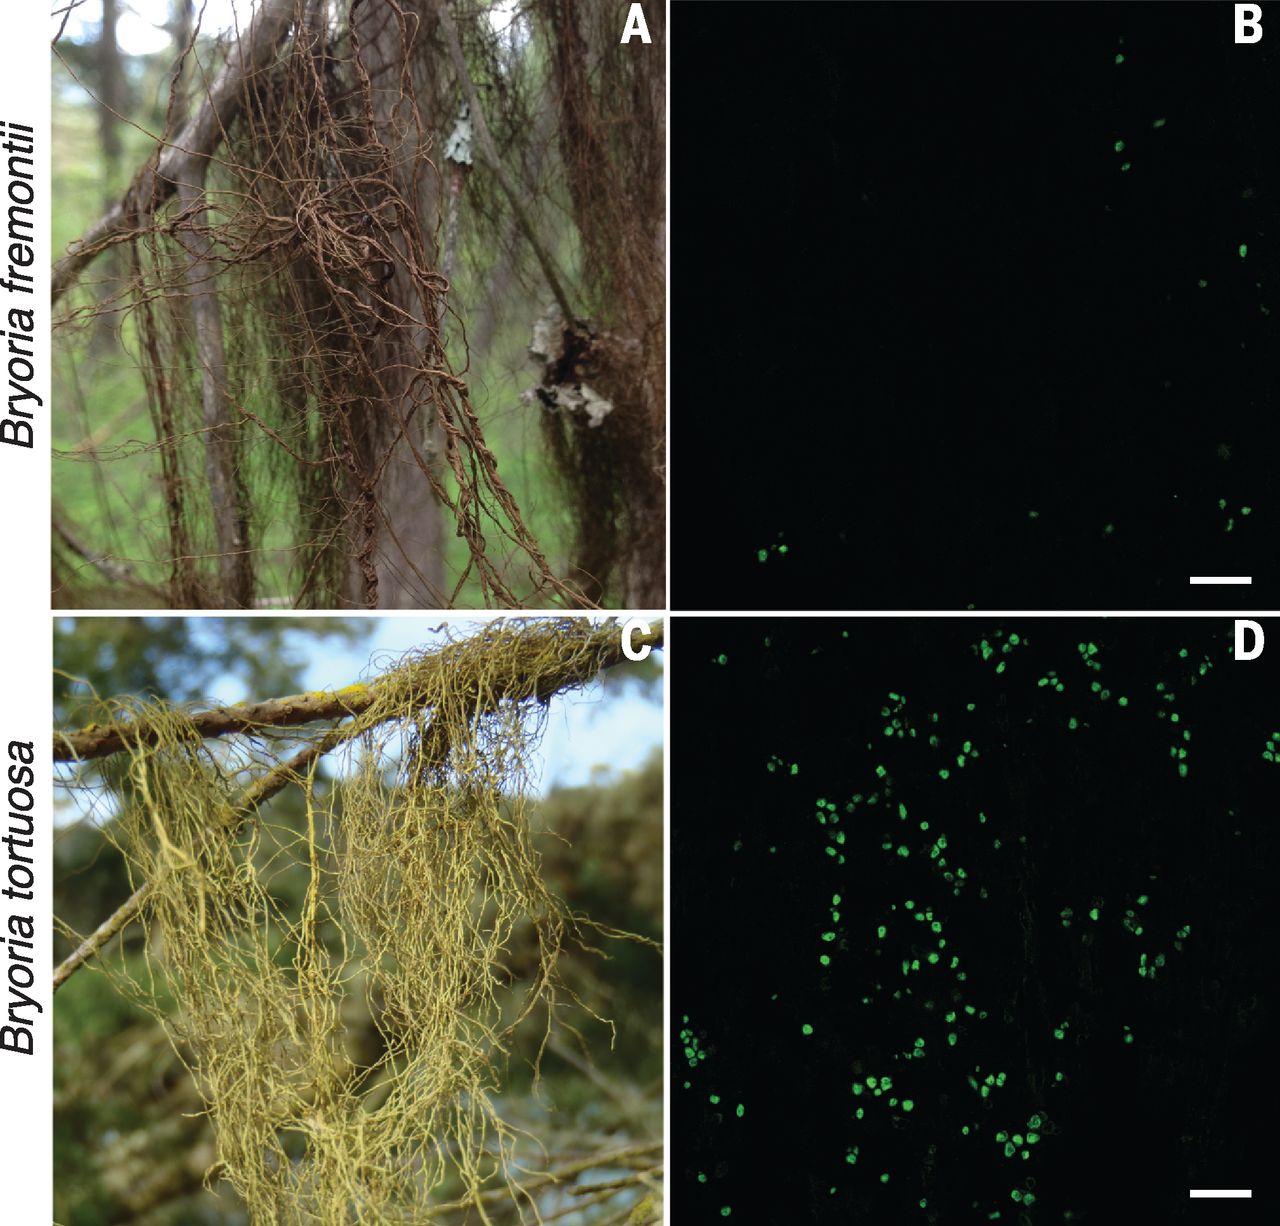 Basidiomycete yeasts in the cortex of ascomycete macrolichens